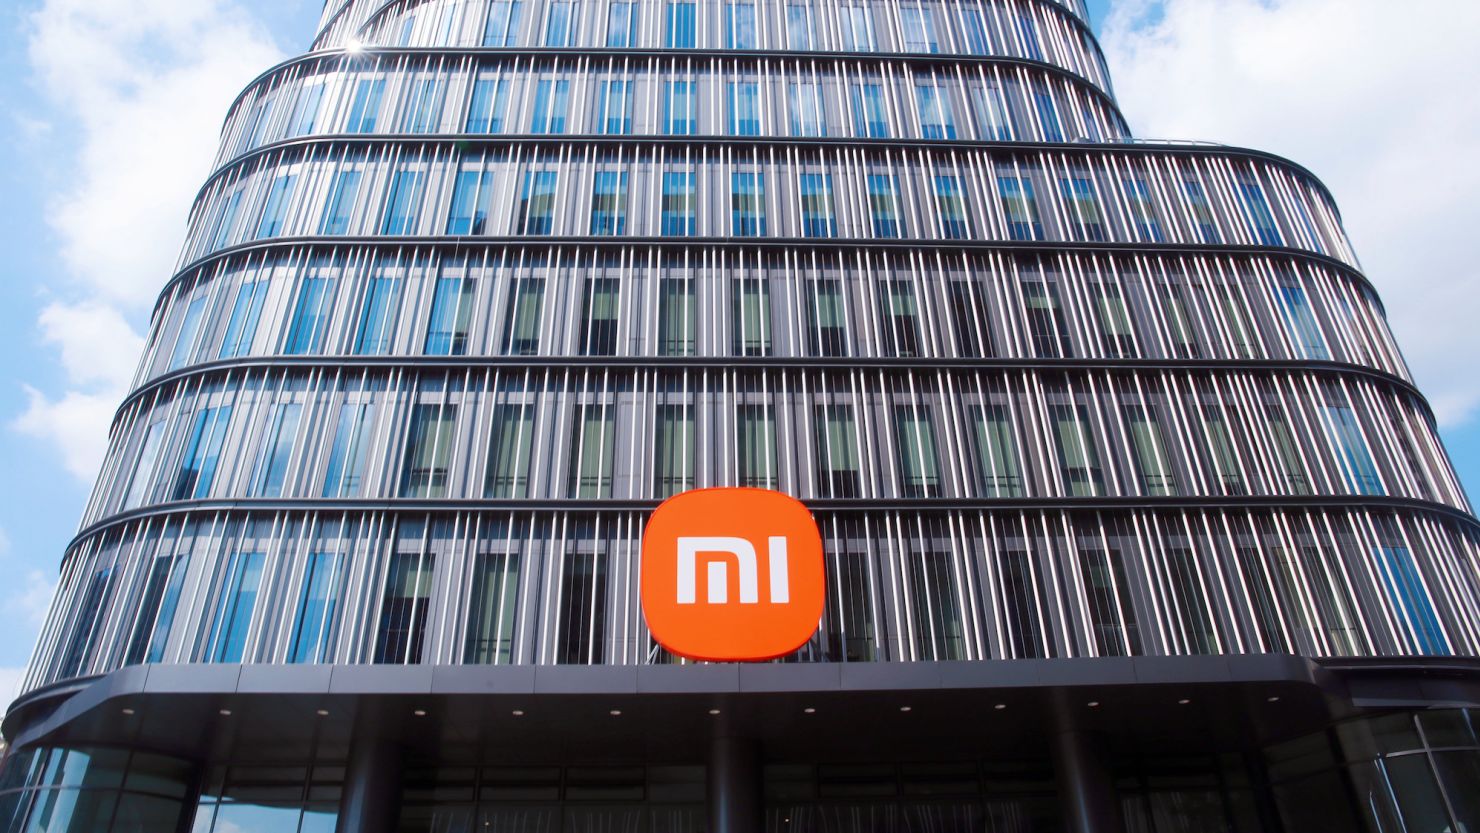 The Xiaomi (MI) Group office building is standing in Shanghai, China, on October 10, 2021. (Photo by Costfoto/NurPhoto via Getty Images)